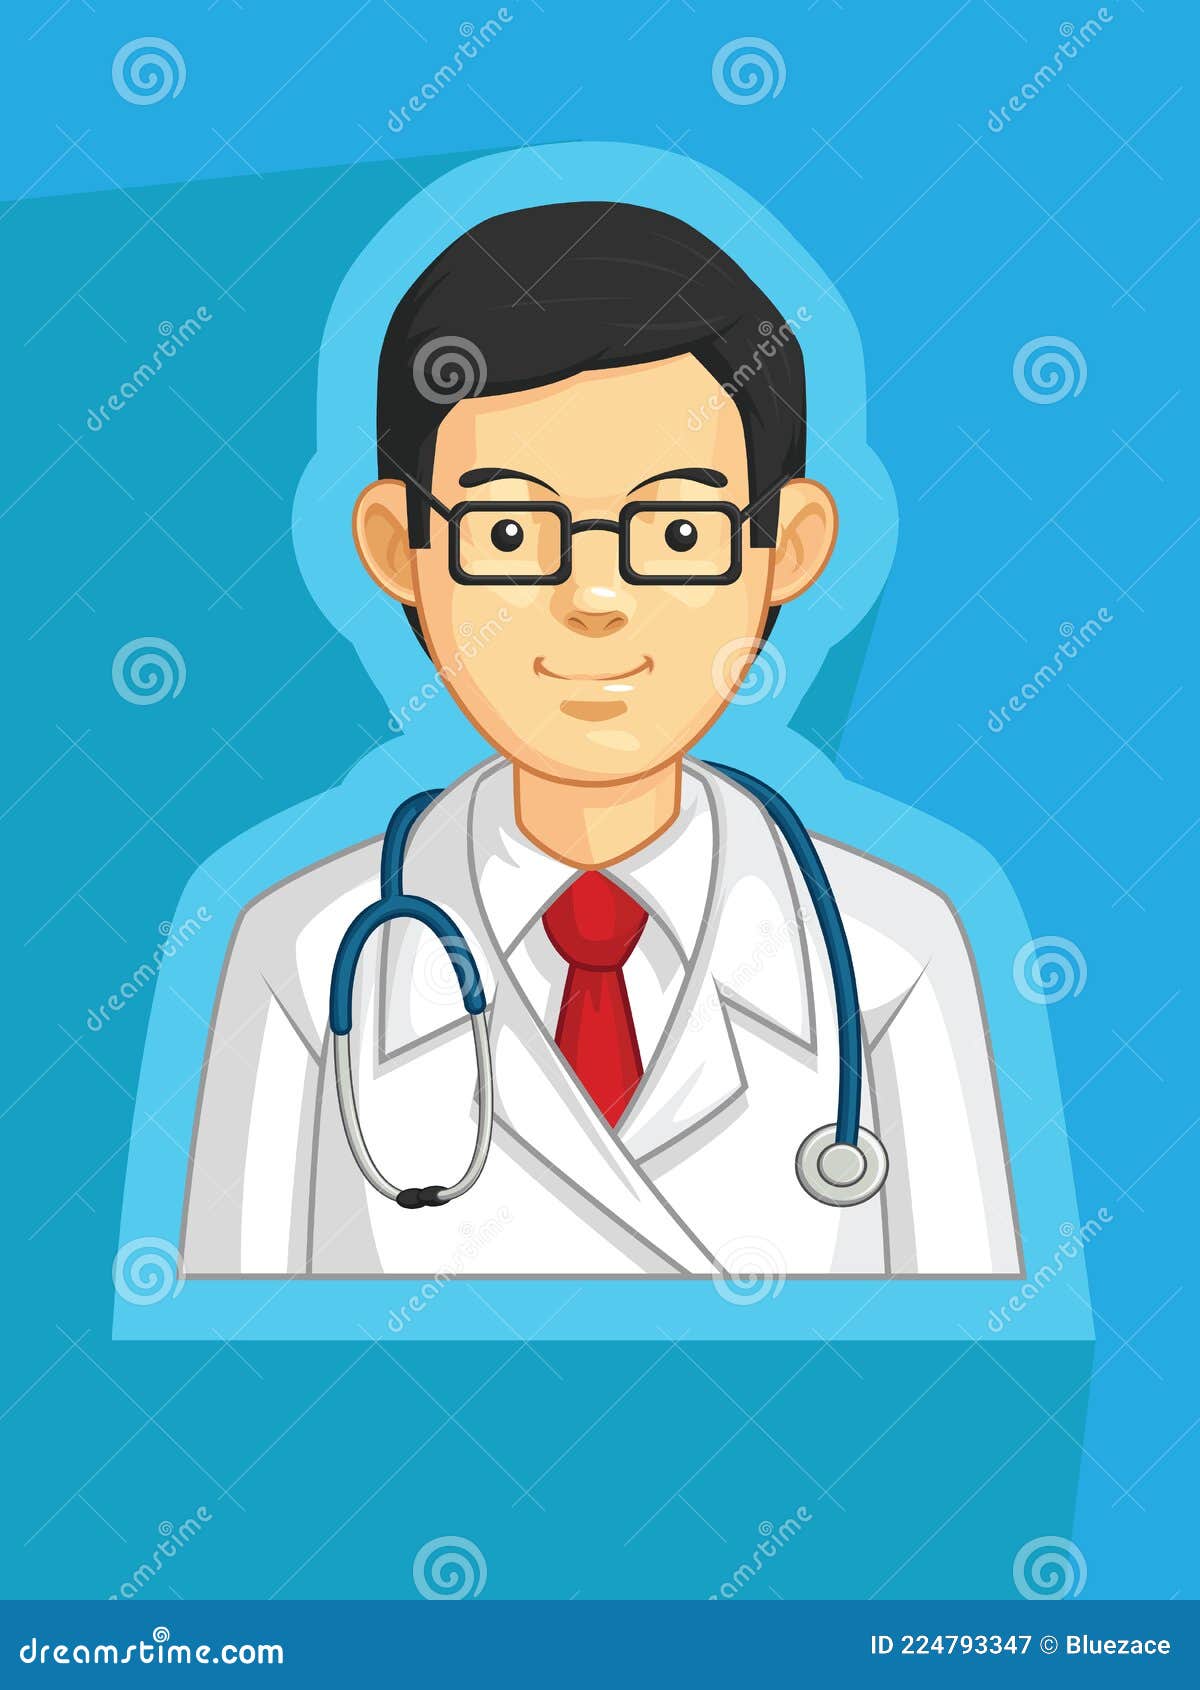 Medical Doctor General Practitioner Physician Profile Avatar Cartoon Stock  Vector - Illustration of line, robe: 224793347